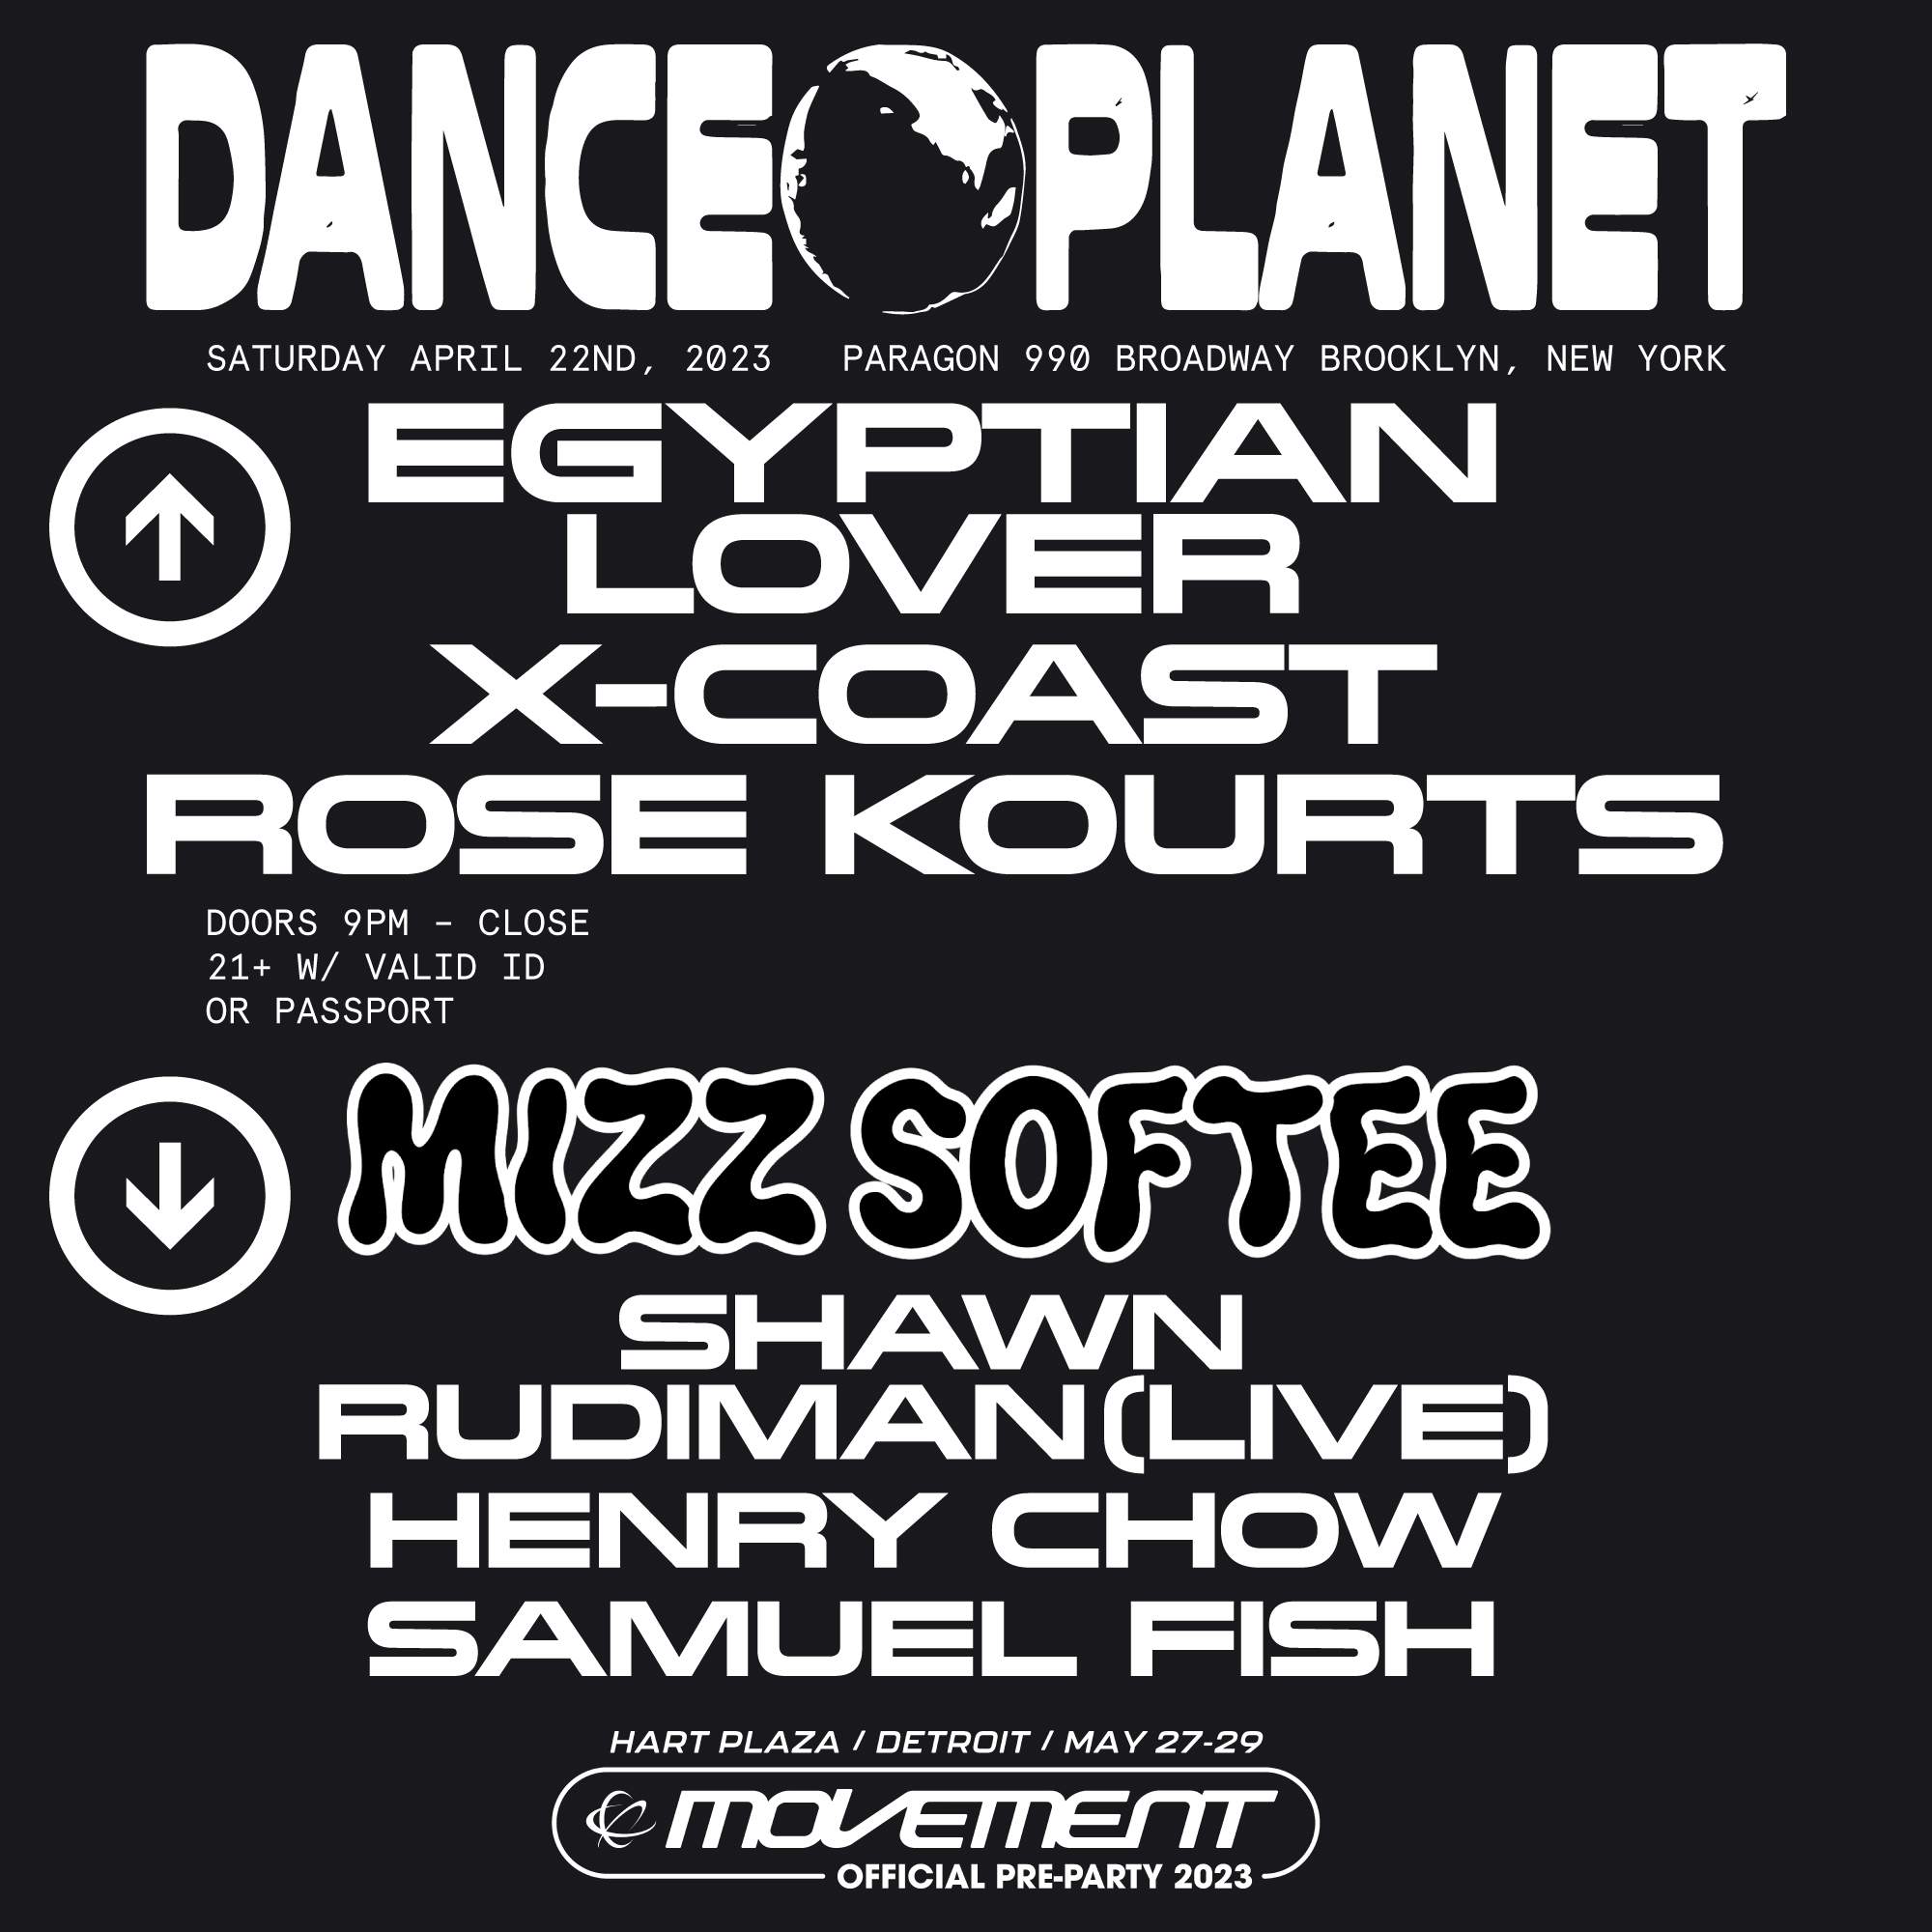 Dance Planet with Egyptian Lover X-Coast Rose Kourts + MIZZ SOFTEE - フライヤー表